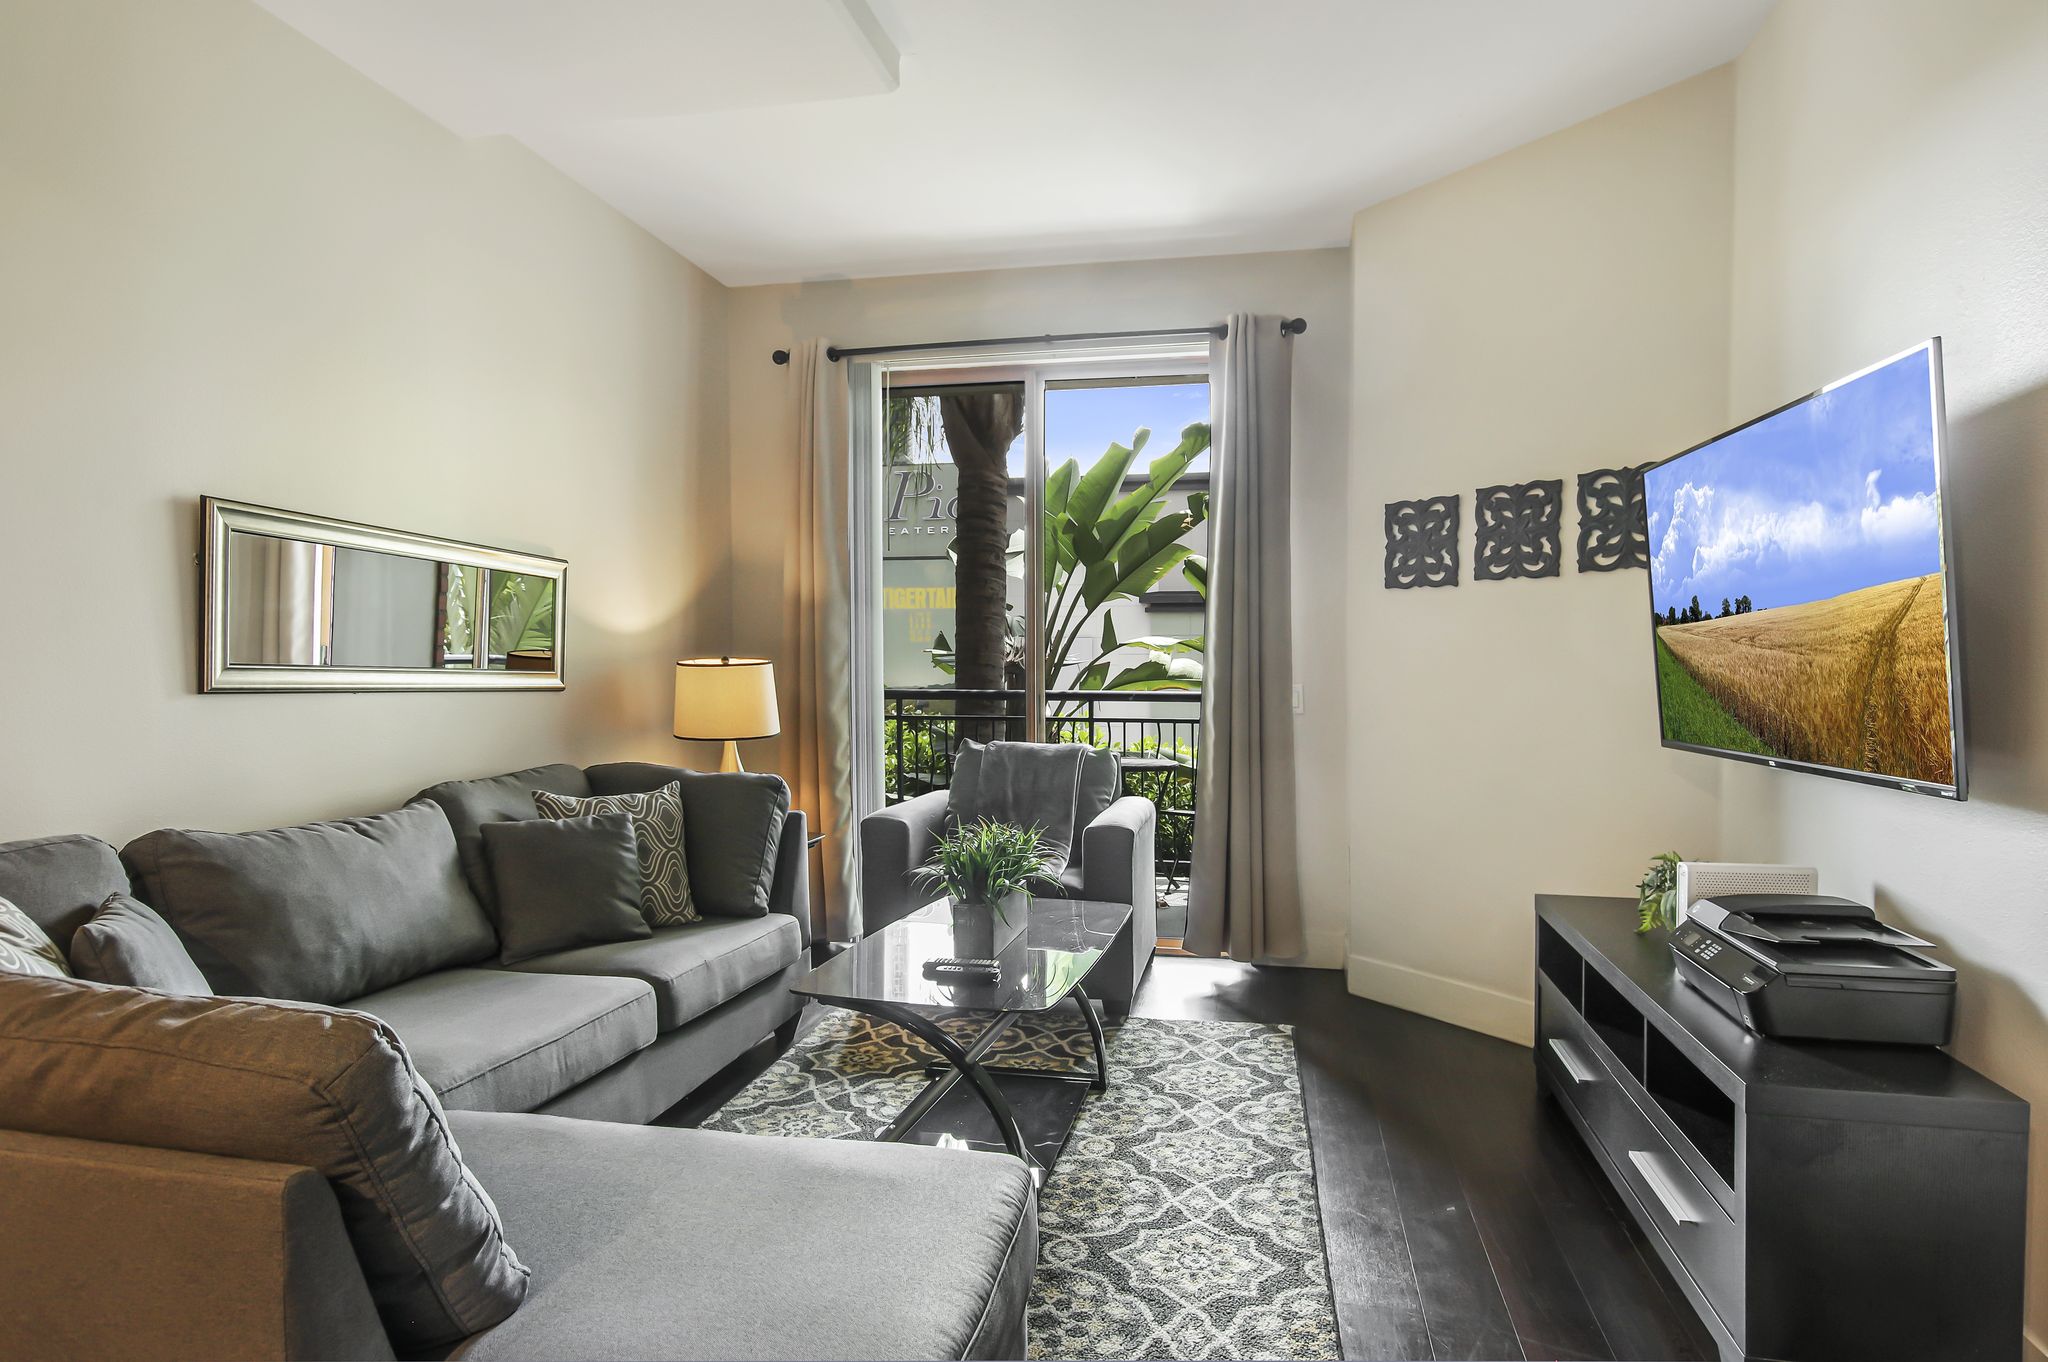 Bedford Corporate Housing Offers Fully-Furnished Short-Term Apartments in Los Angeles